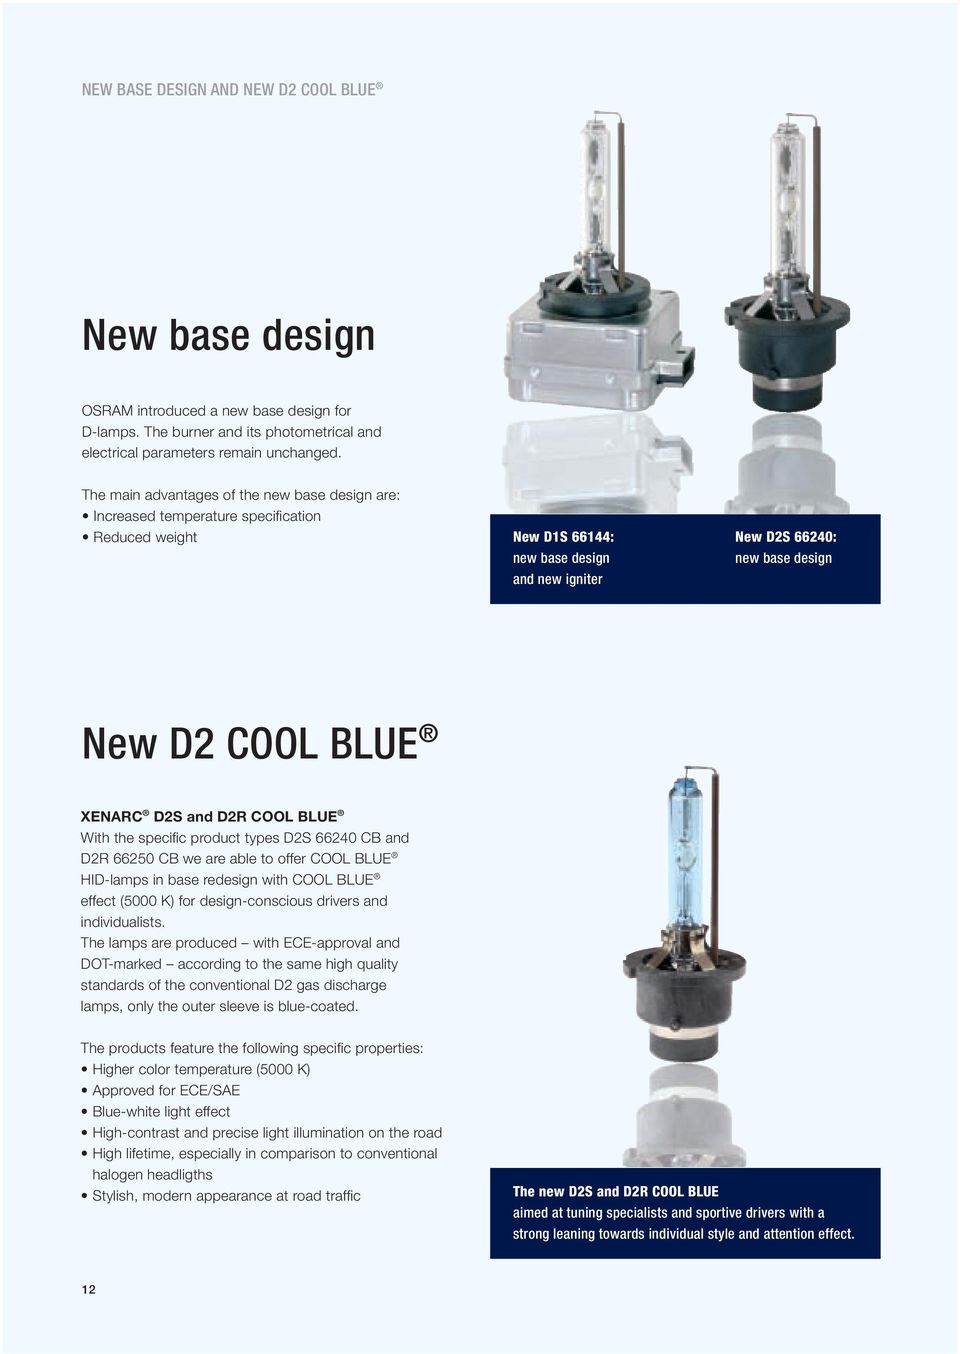 XENARC D2S and D2R COOL BLUE With the specifi c product types D2S 66240 CB and D2R 66250 CB we are able to offer COOL BLUE HID lamps in base redesign with COOL BLUE effect (5000 K) for design